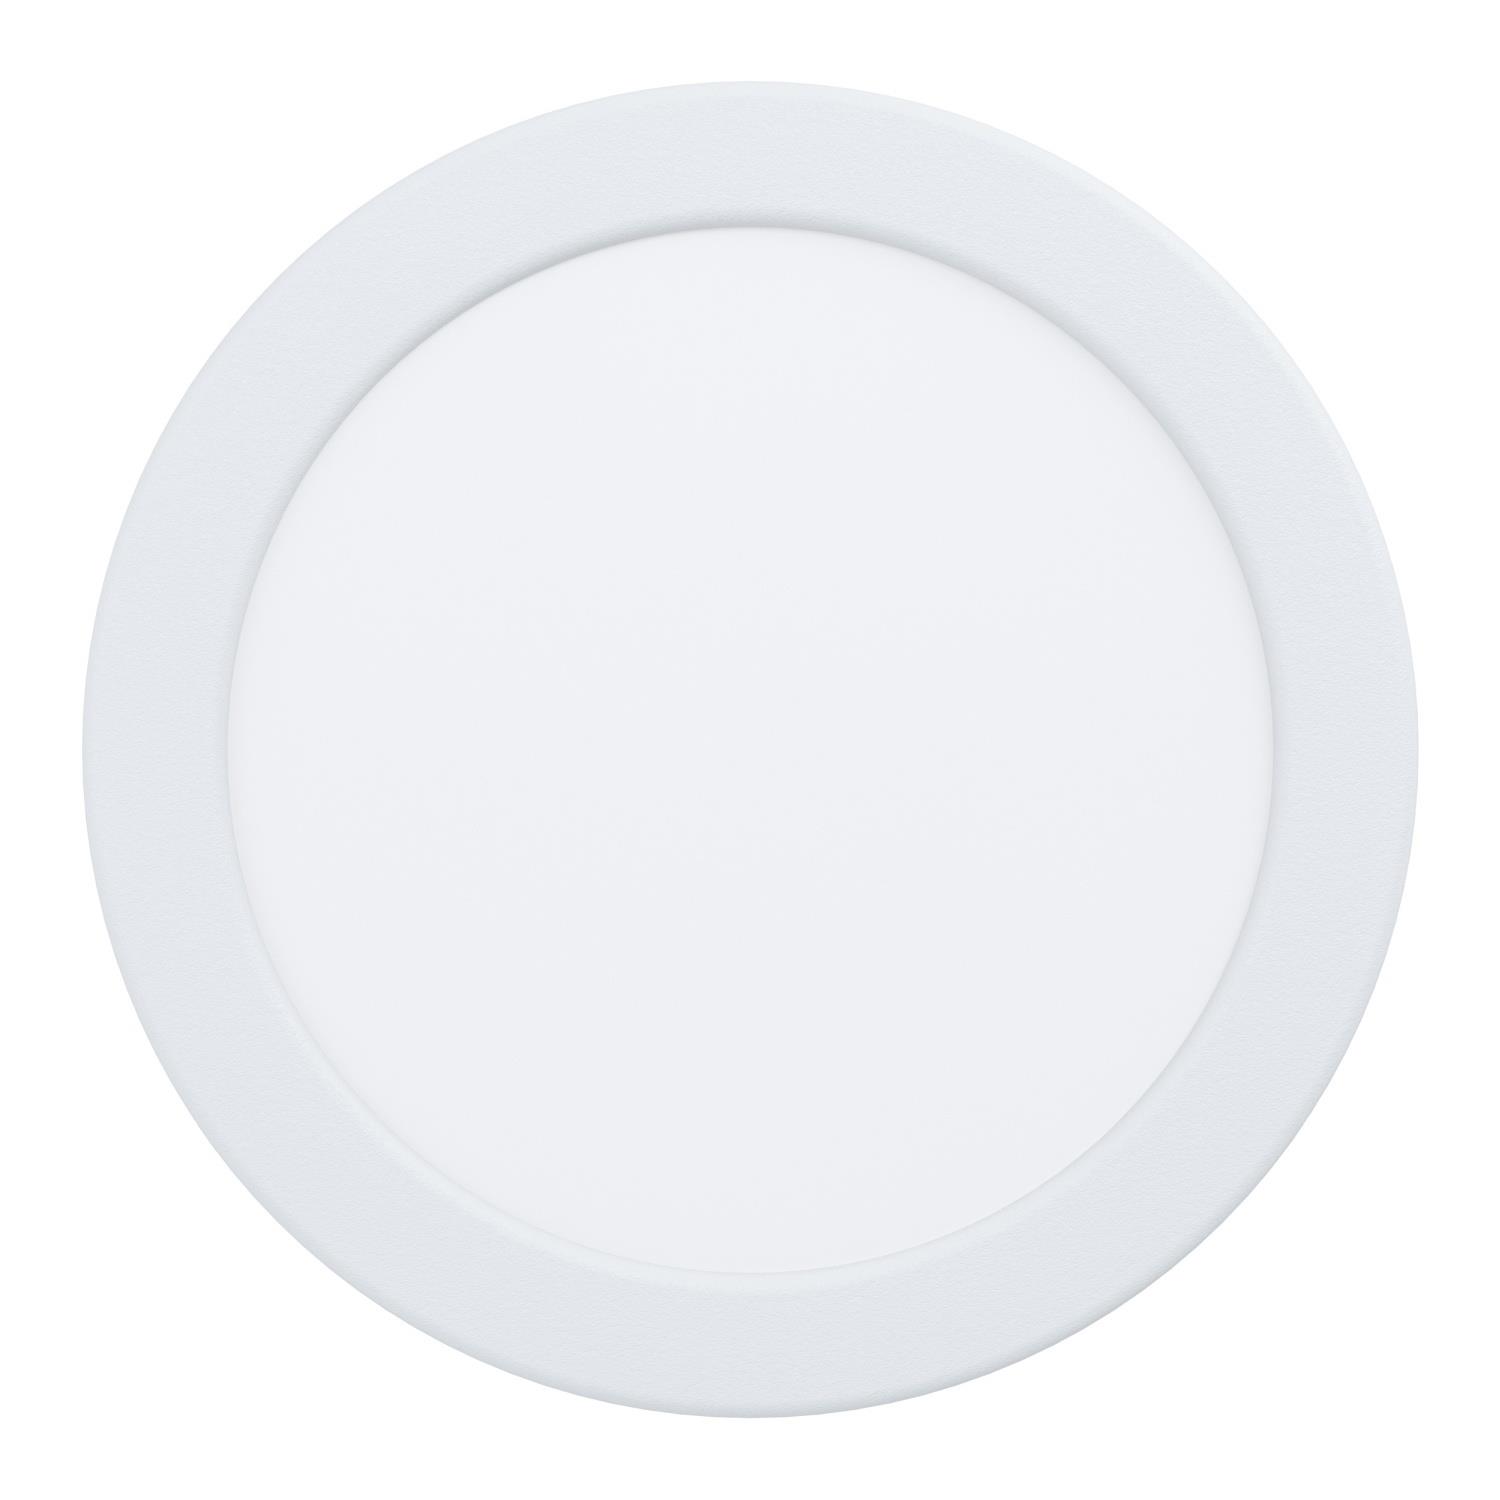 Fueva 5 IP44 Large Shallow Recessed LED Bathroom Downlight | The ...